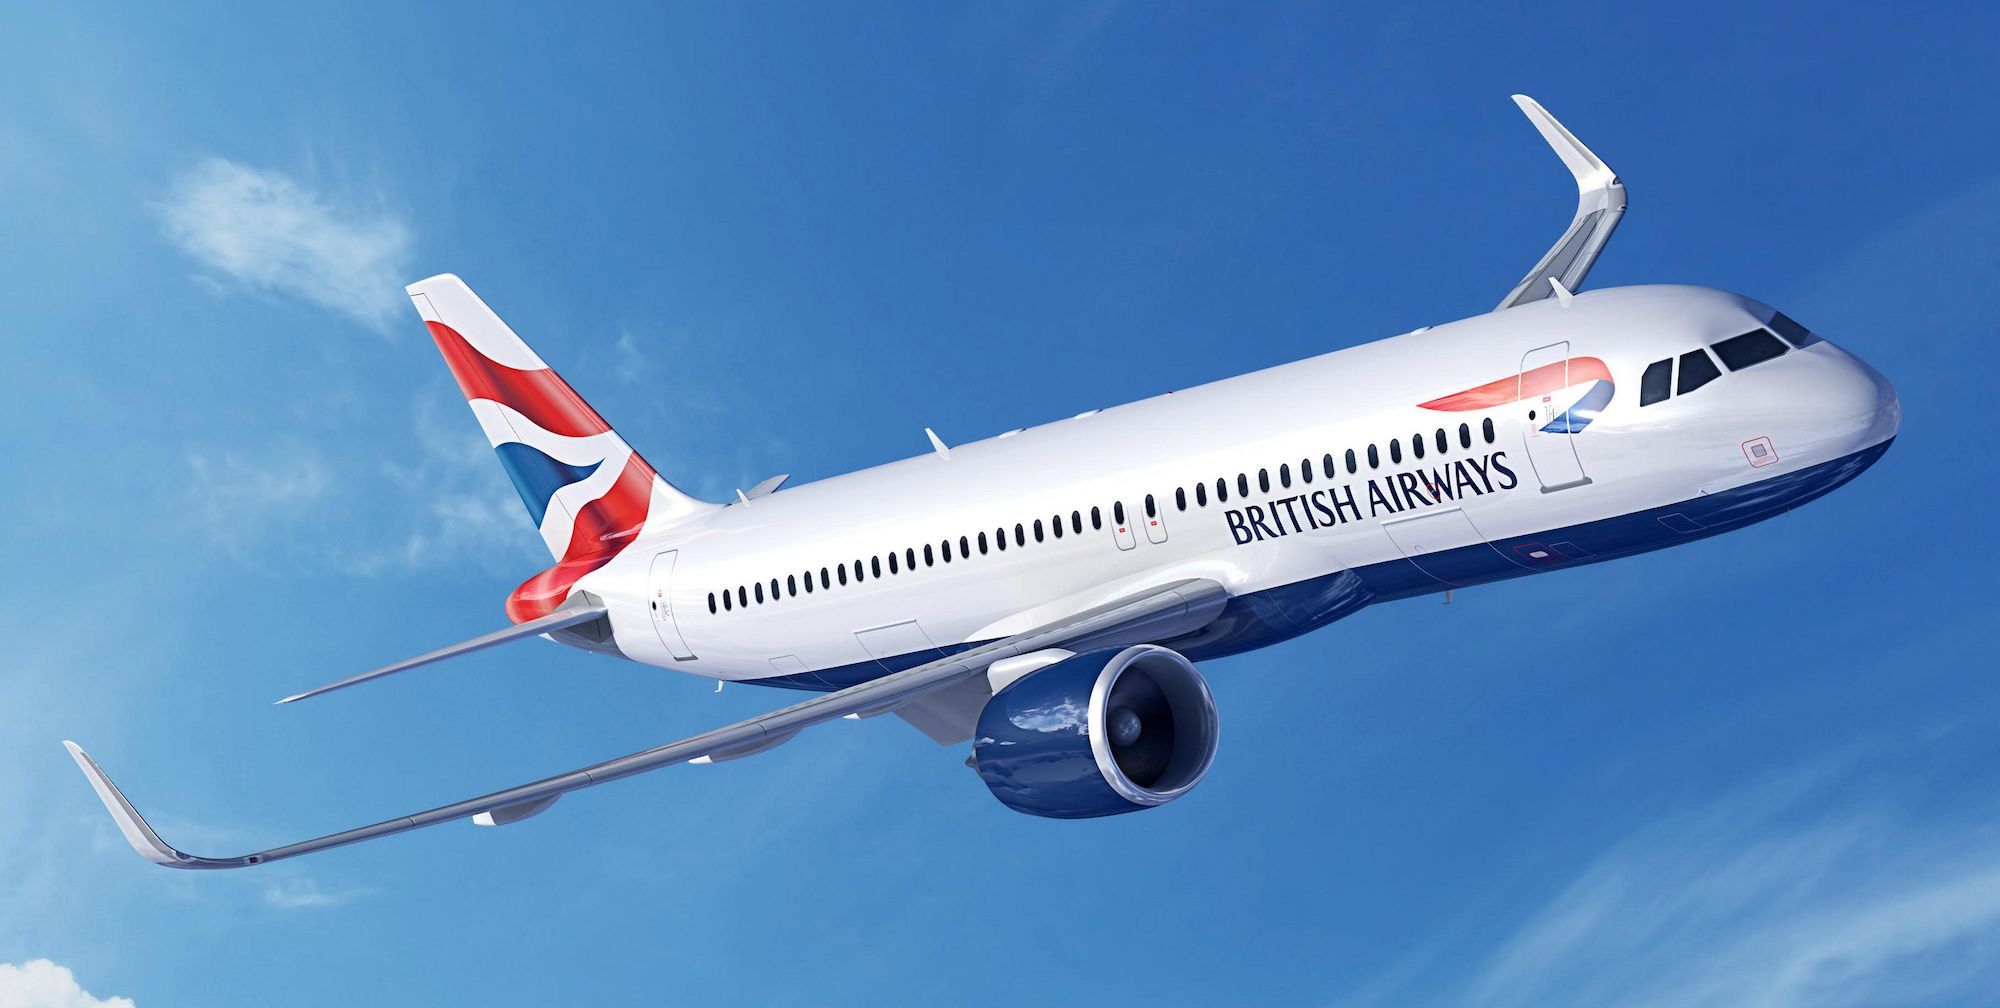 British Airways Takes Delivery Of Its 20th Airbus A320neo - Worldnews.com